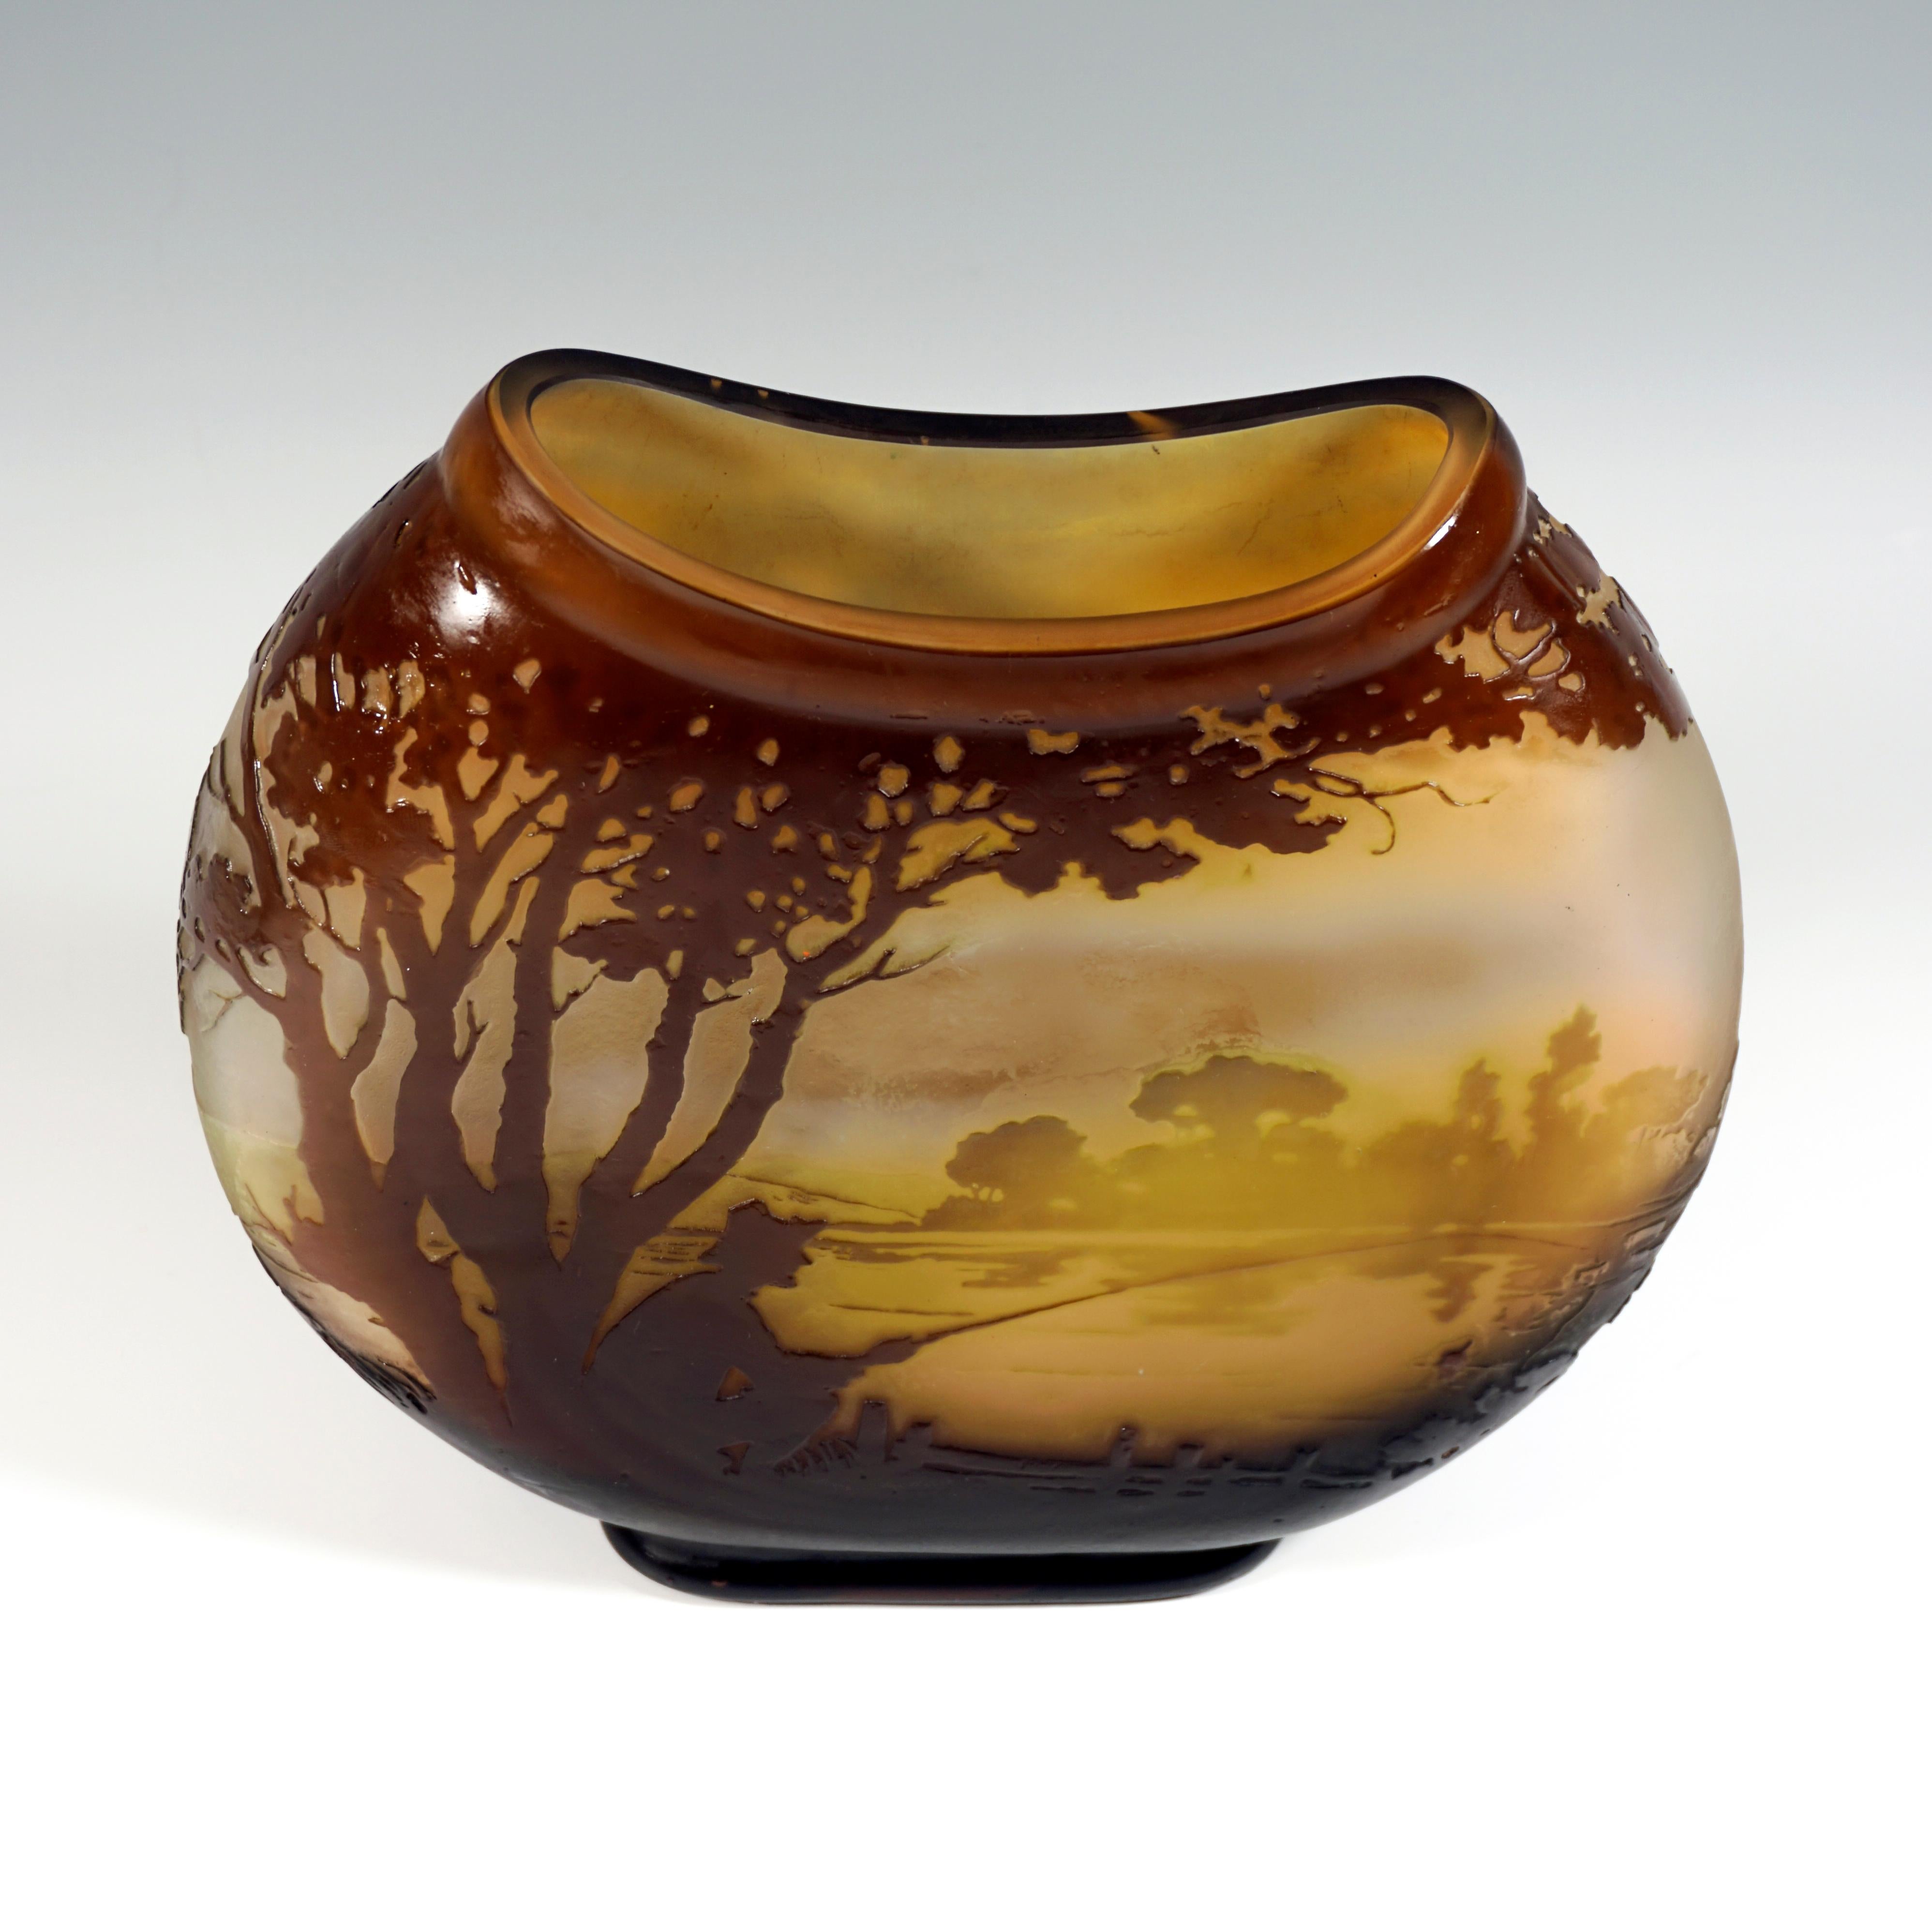 Large Round Émile Gallé Art Nouveau Cameo Vase with Seascape Decor, France 1905 In Good Condition For Sale In Vienna, AT